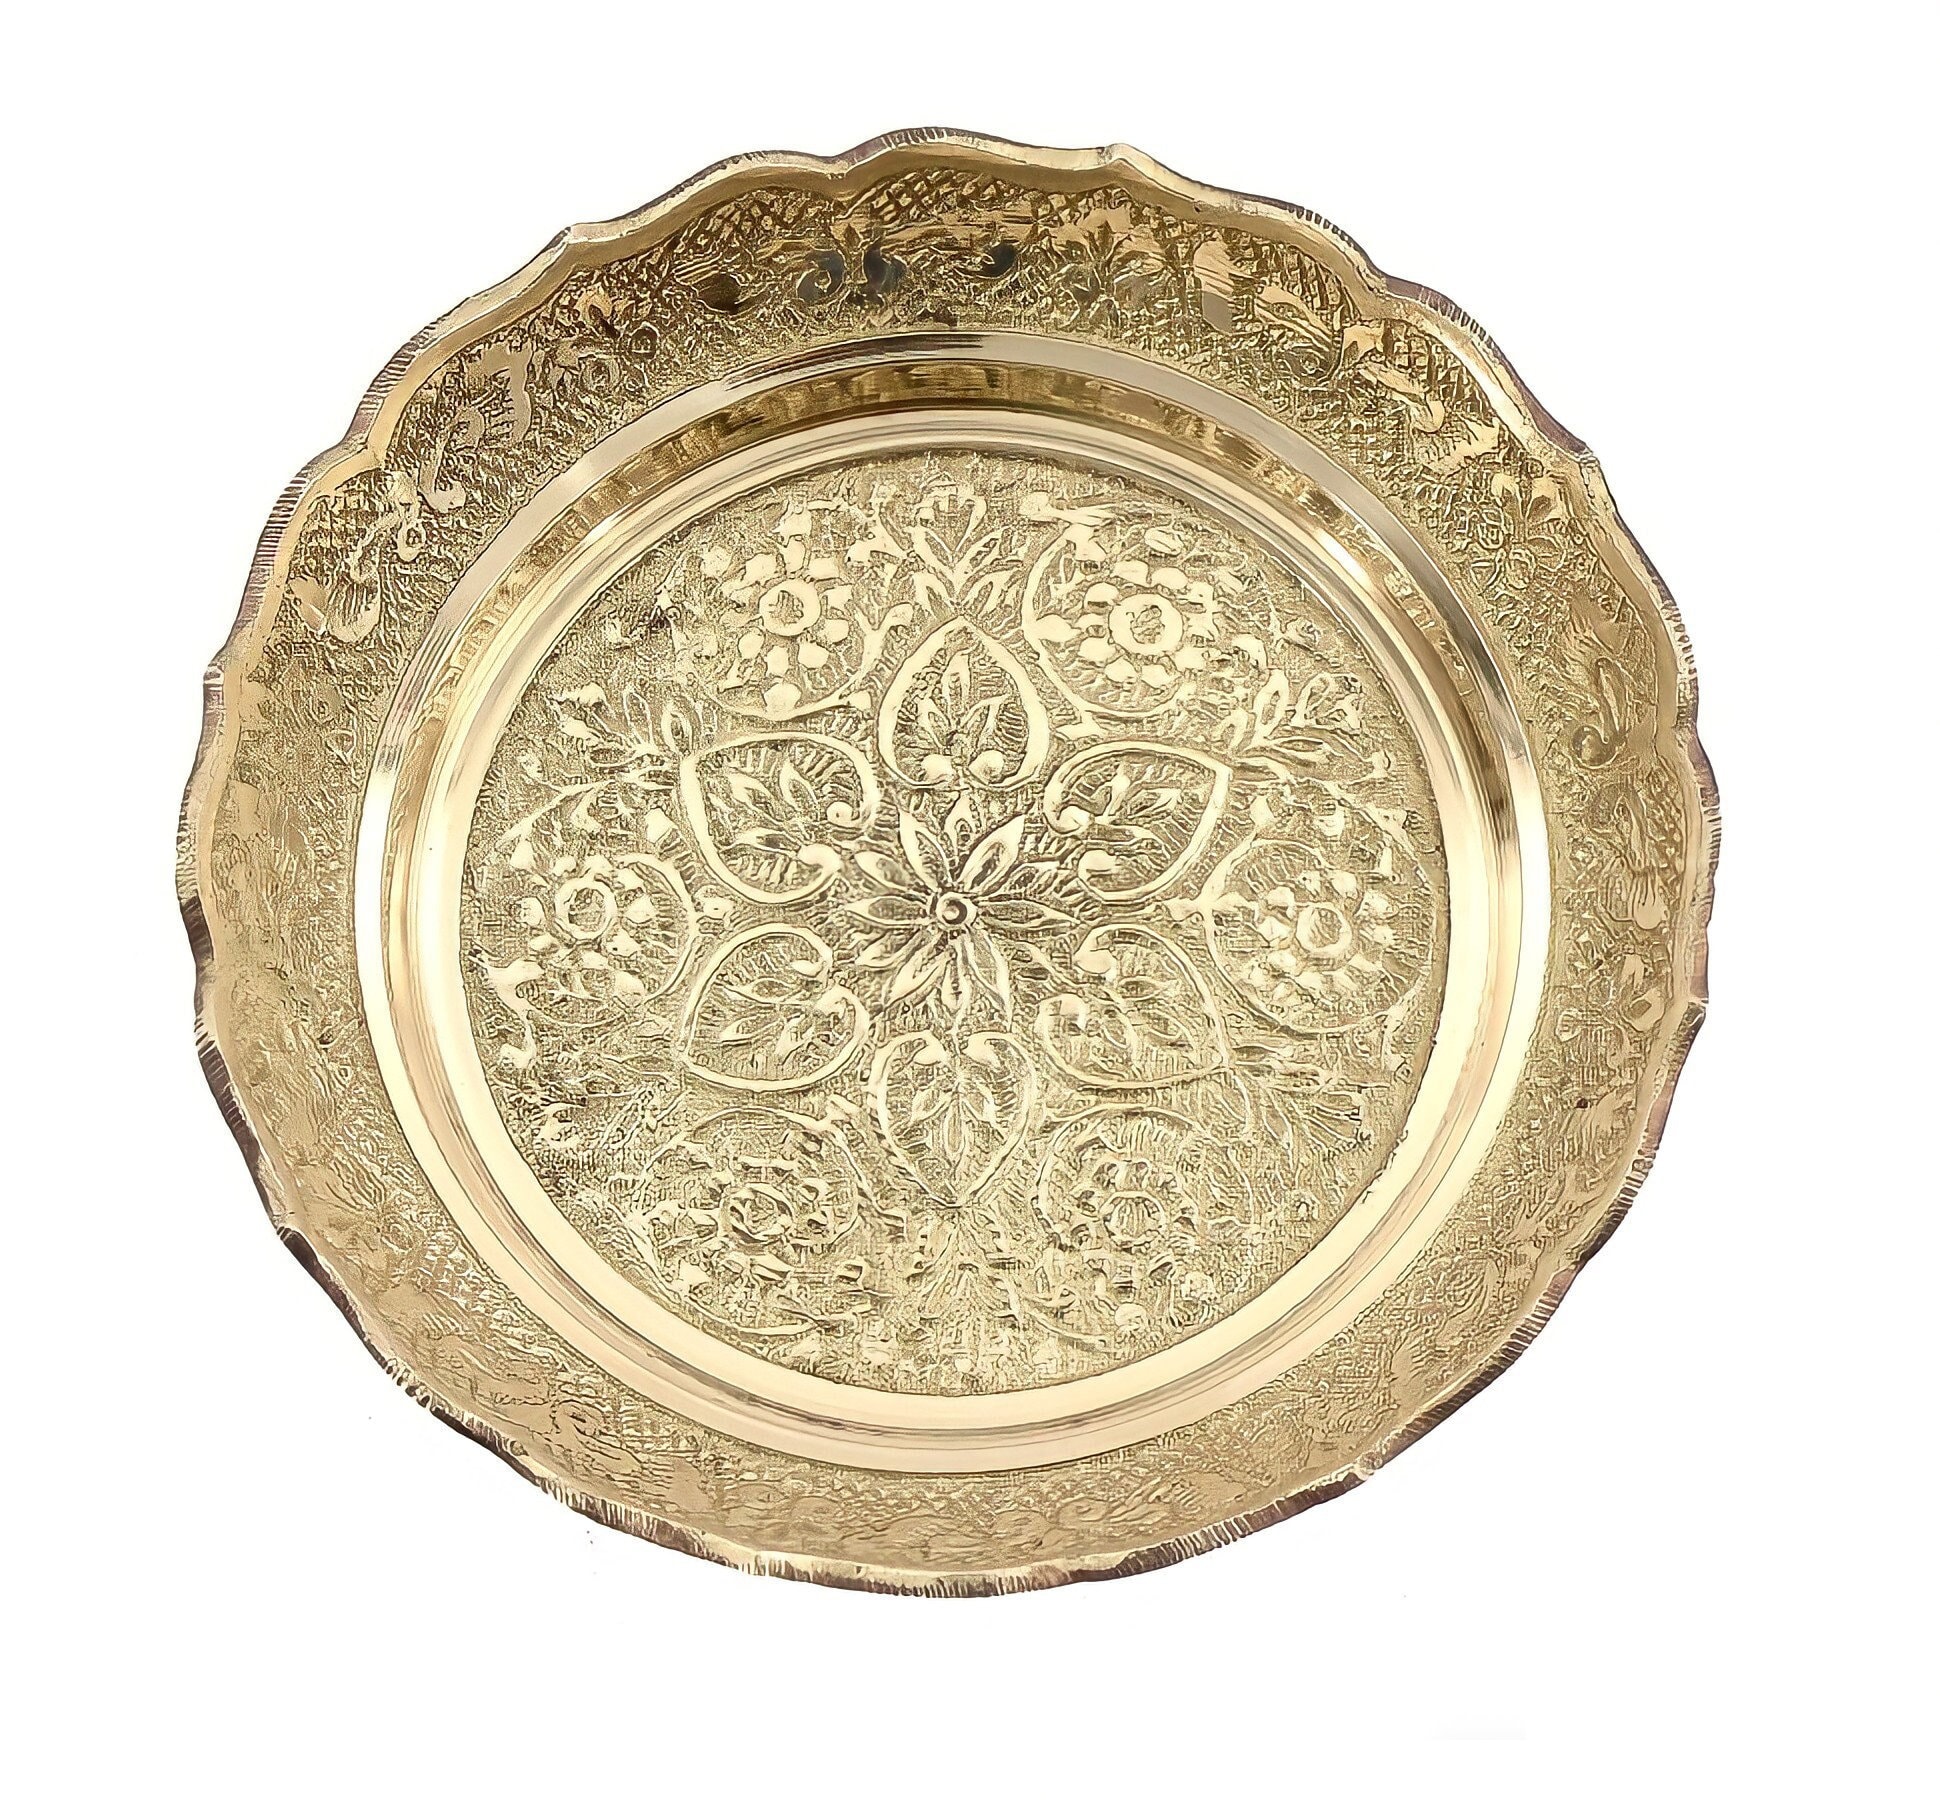 Aatm Brass Embossed Designed Puja Plate in Pair Best for Home & Office Decoration & Gift Purpose Handicraft 3.5 inch 